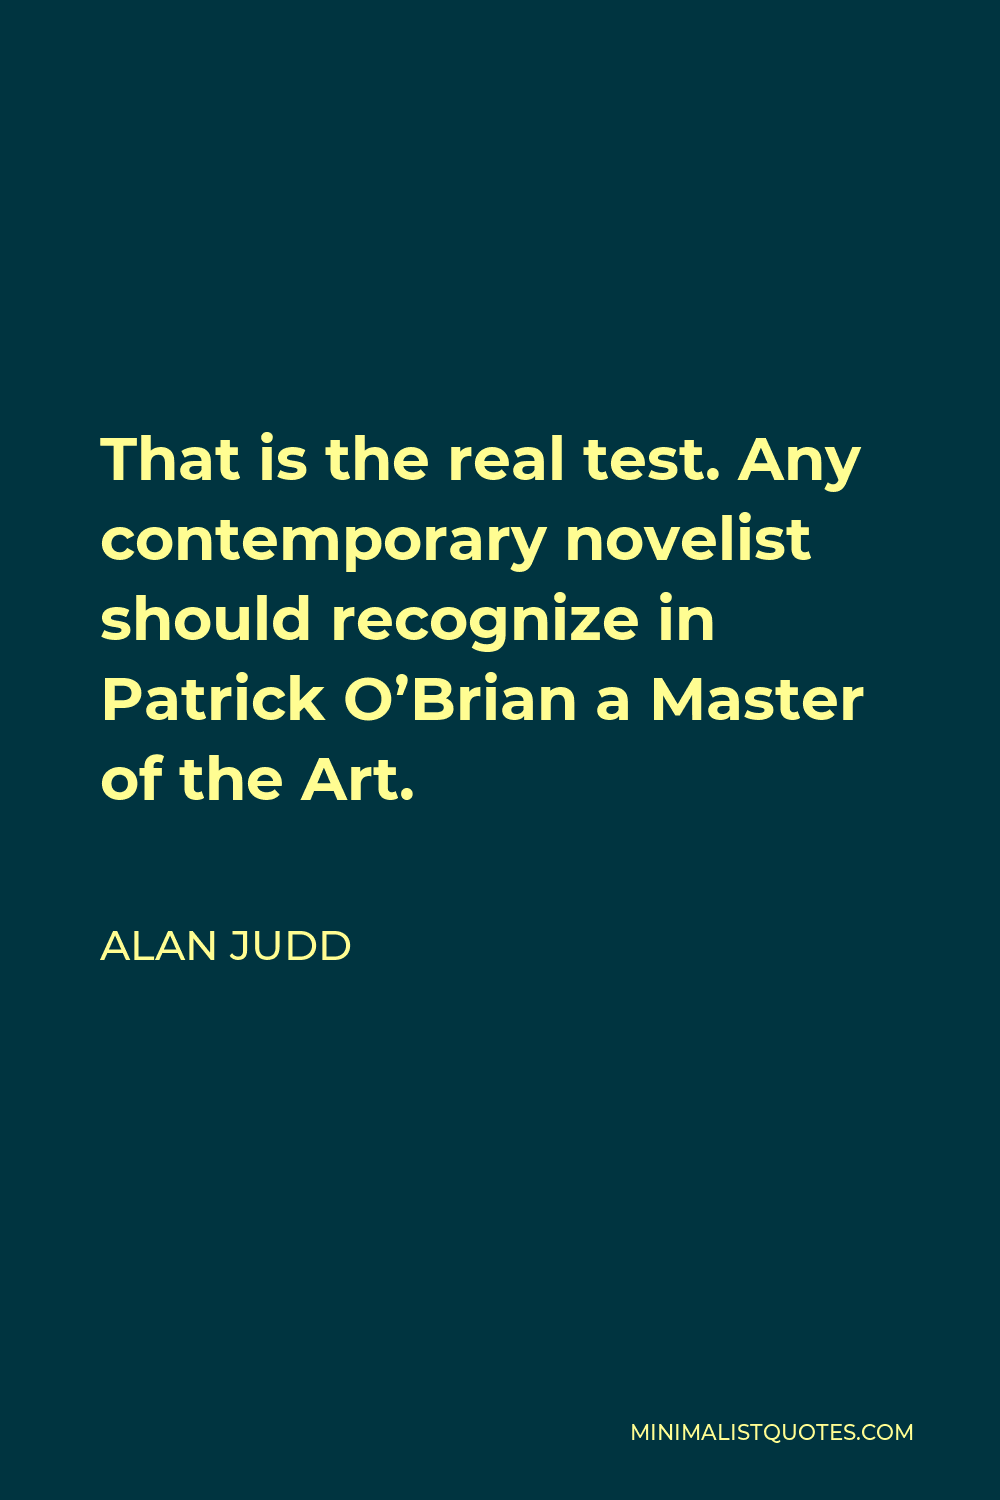 Alan Judd Quote - That is the real test. Any contemporary novelist should recognize in Patrick O’Brian a Master of the Art.